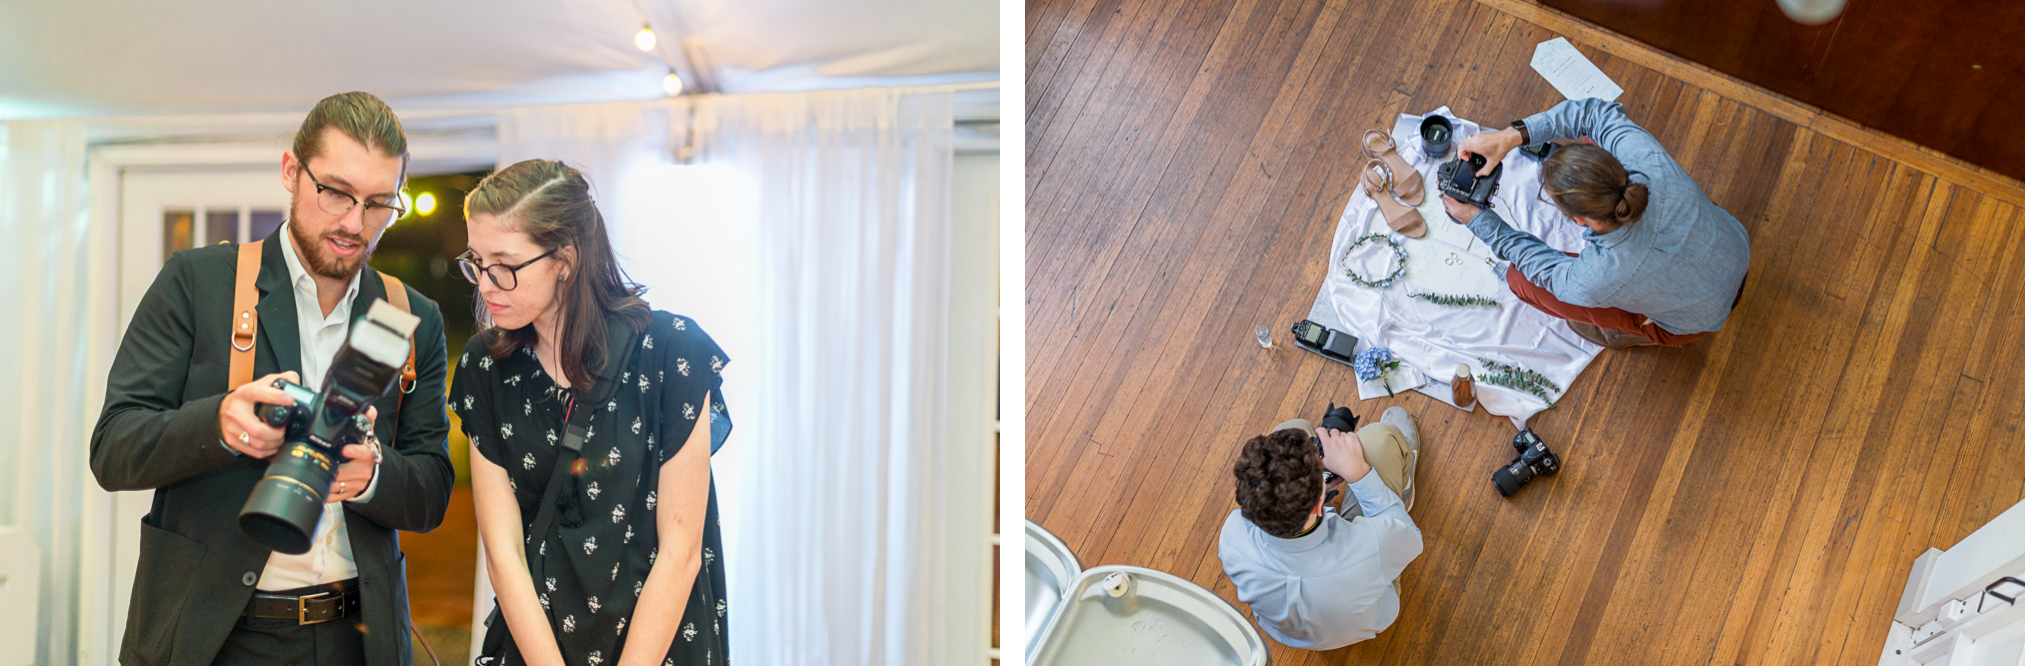 Behind the Scenes 2019 Wedding Photography - Hunter and Sarah Photography